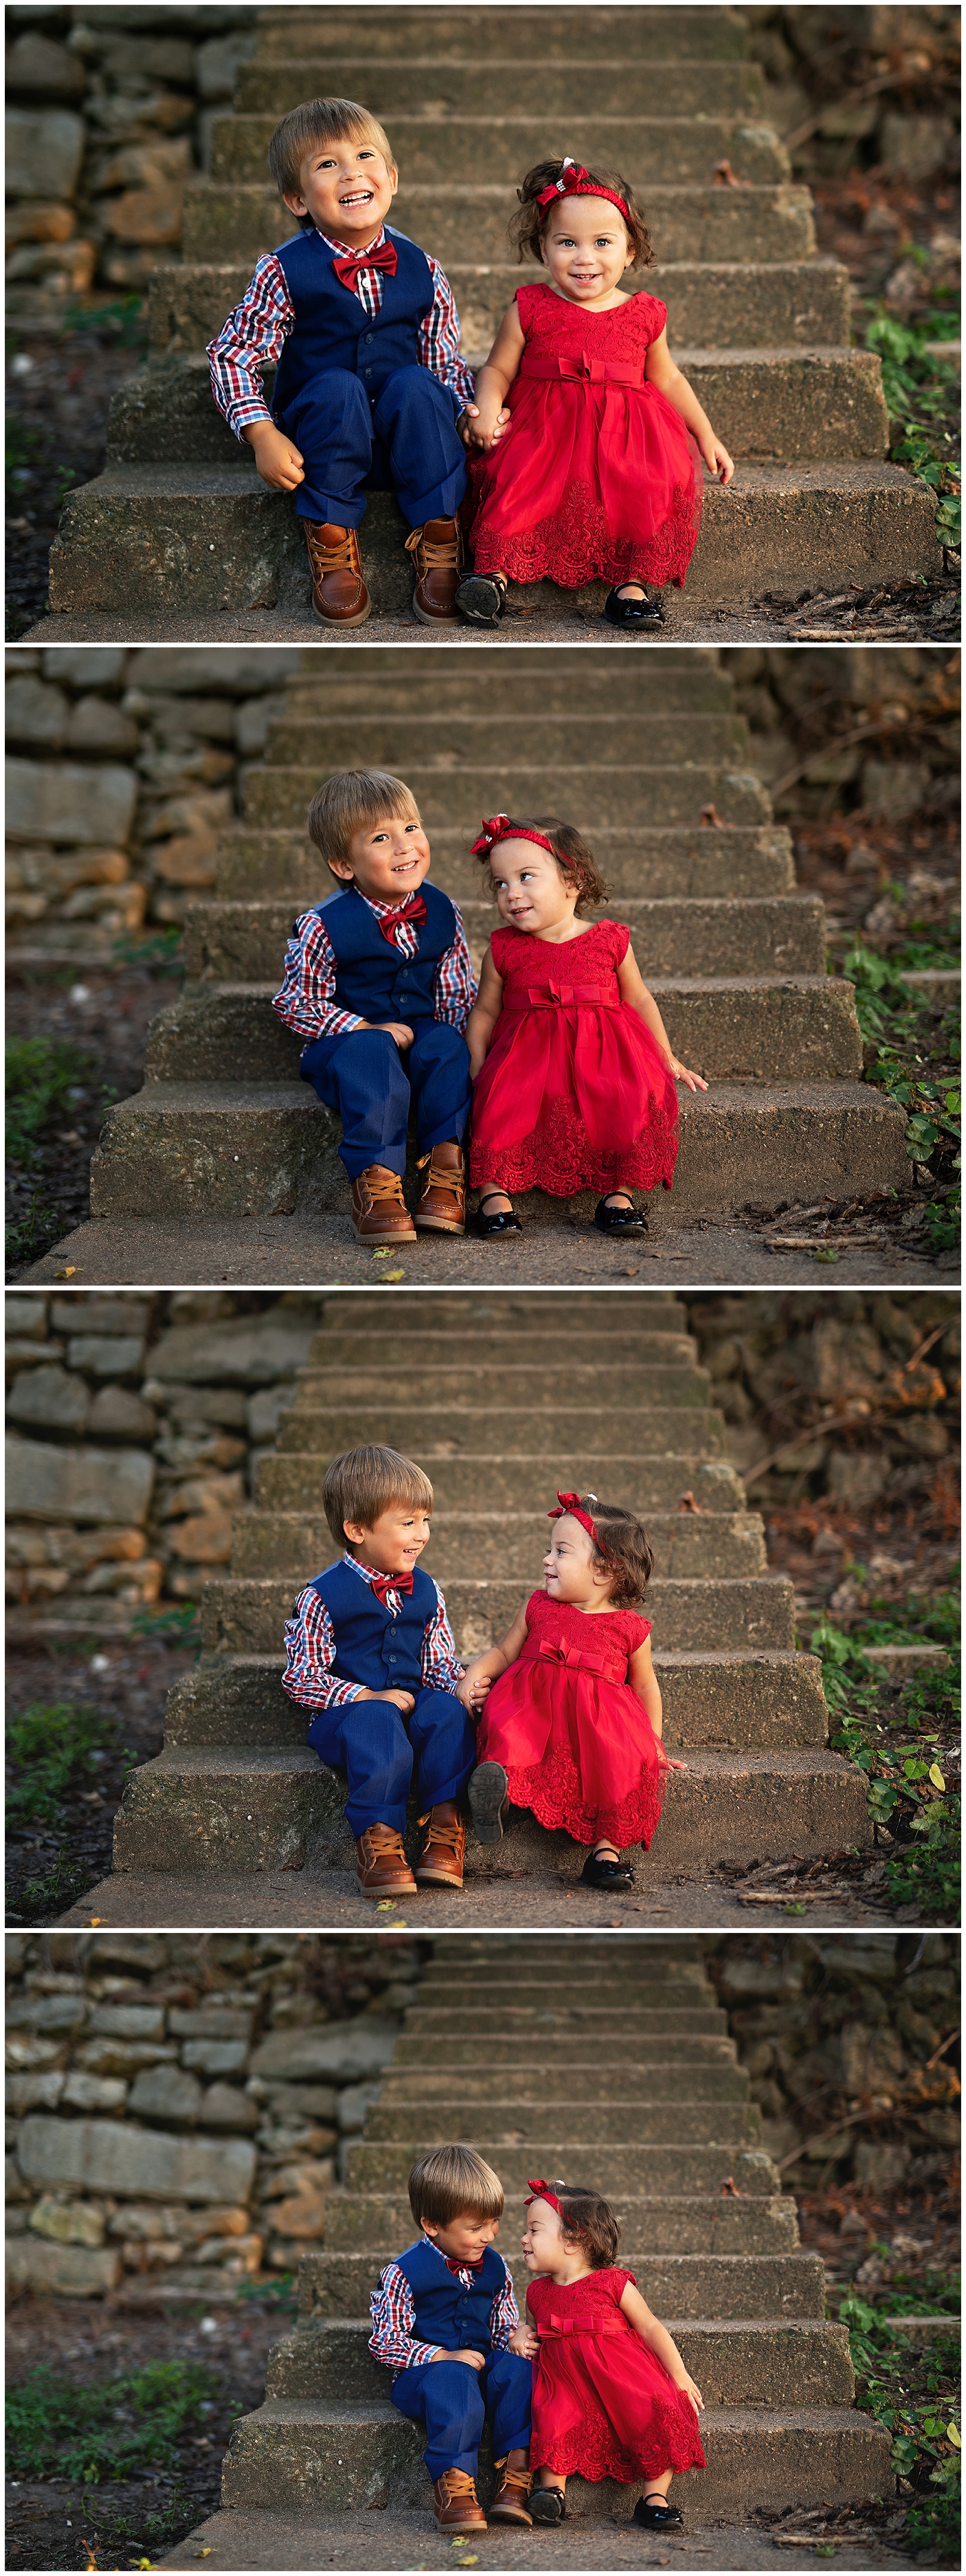 brother and sister sitting on concrete steps holding hands smiling